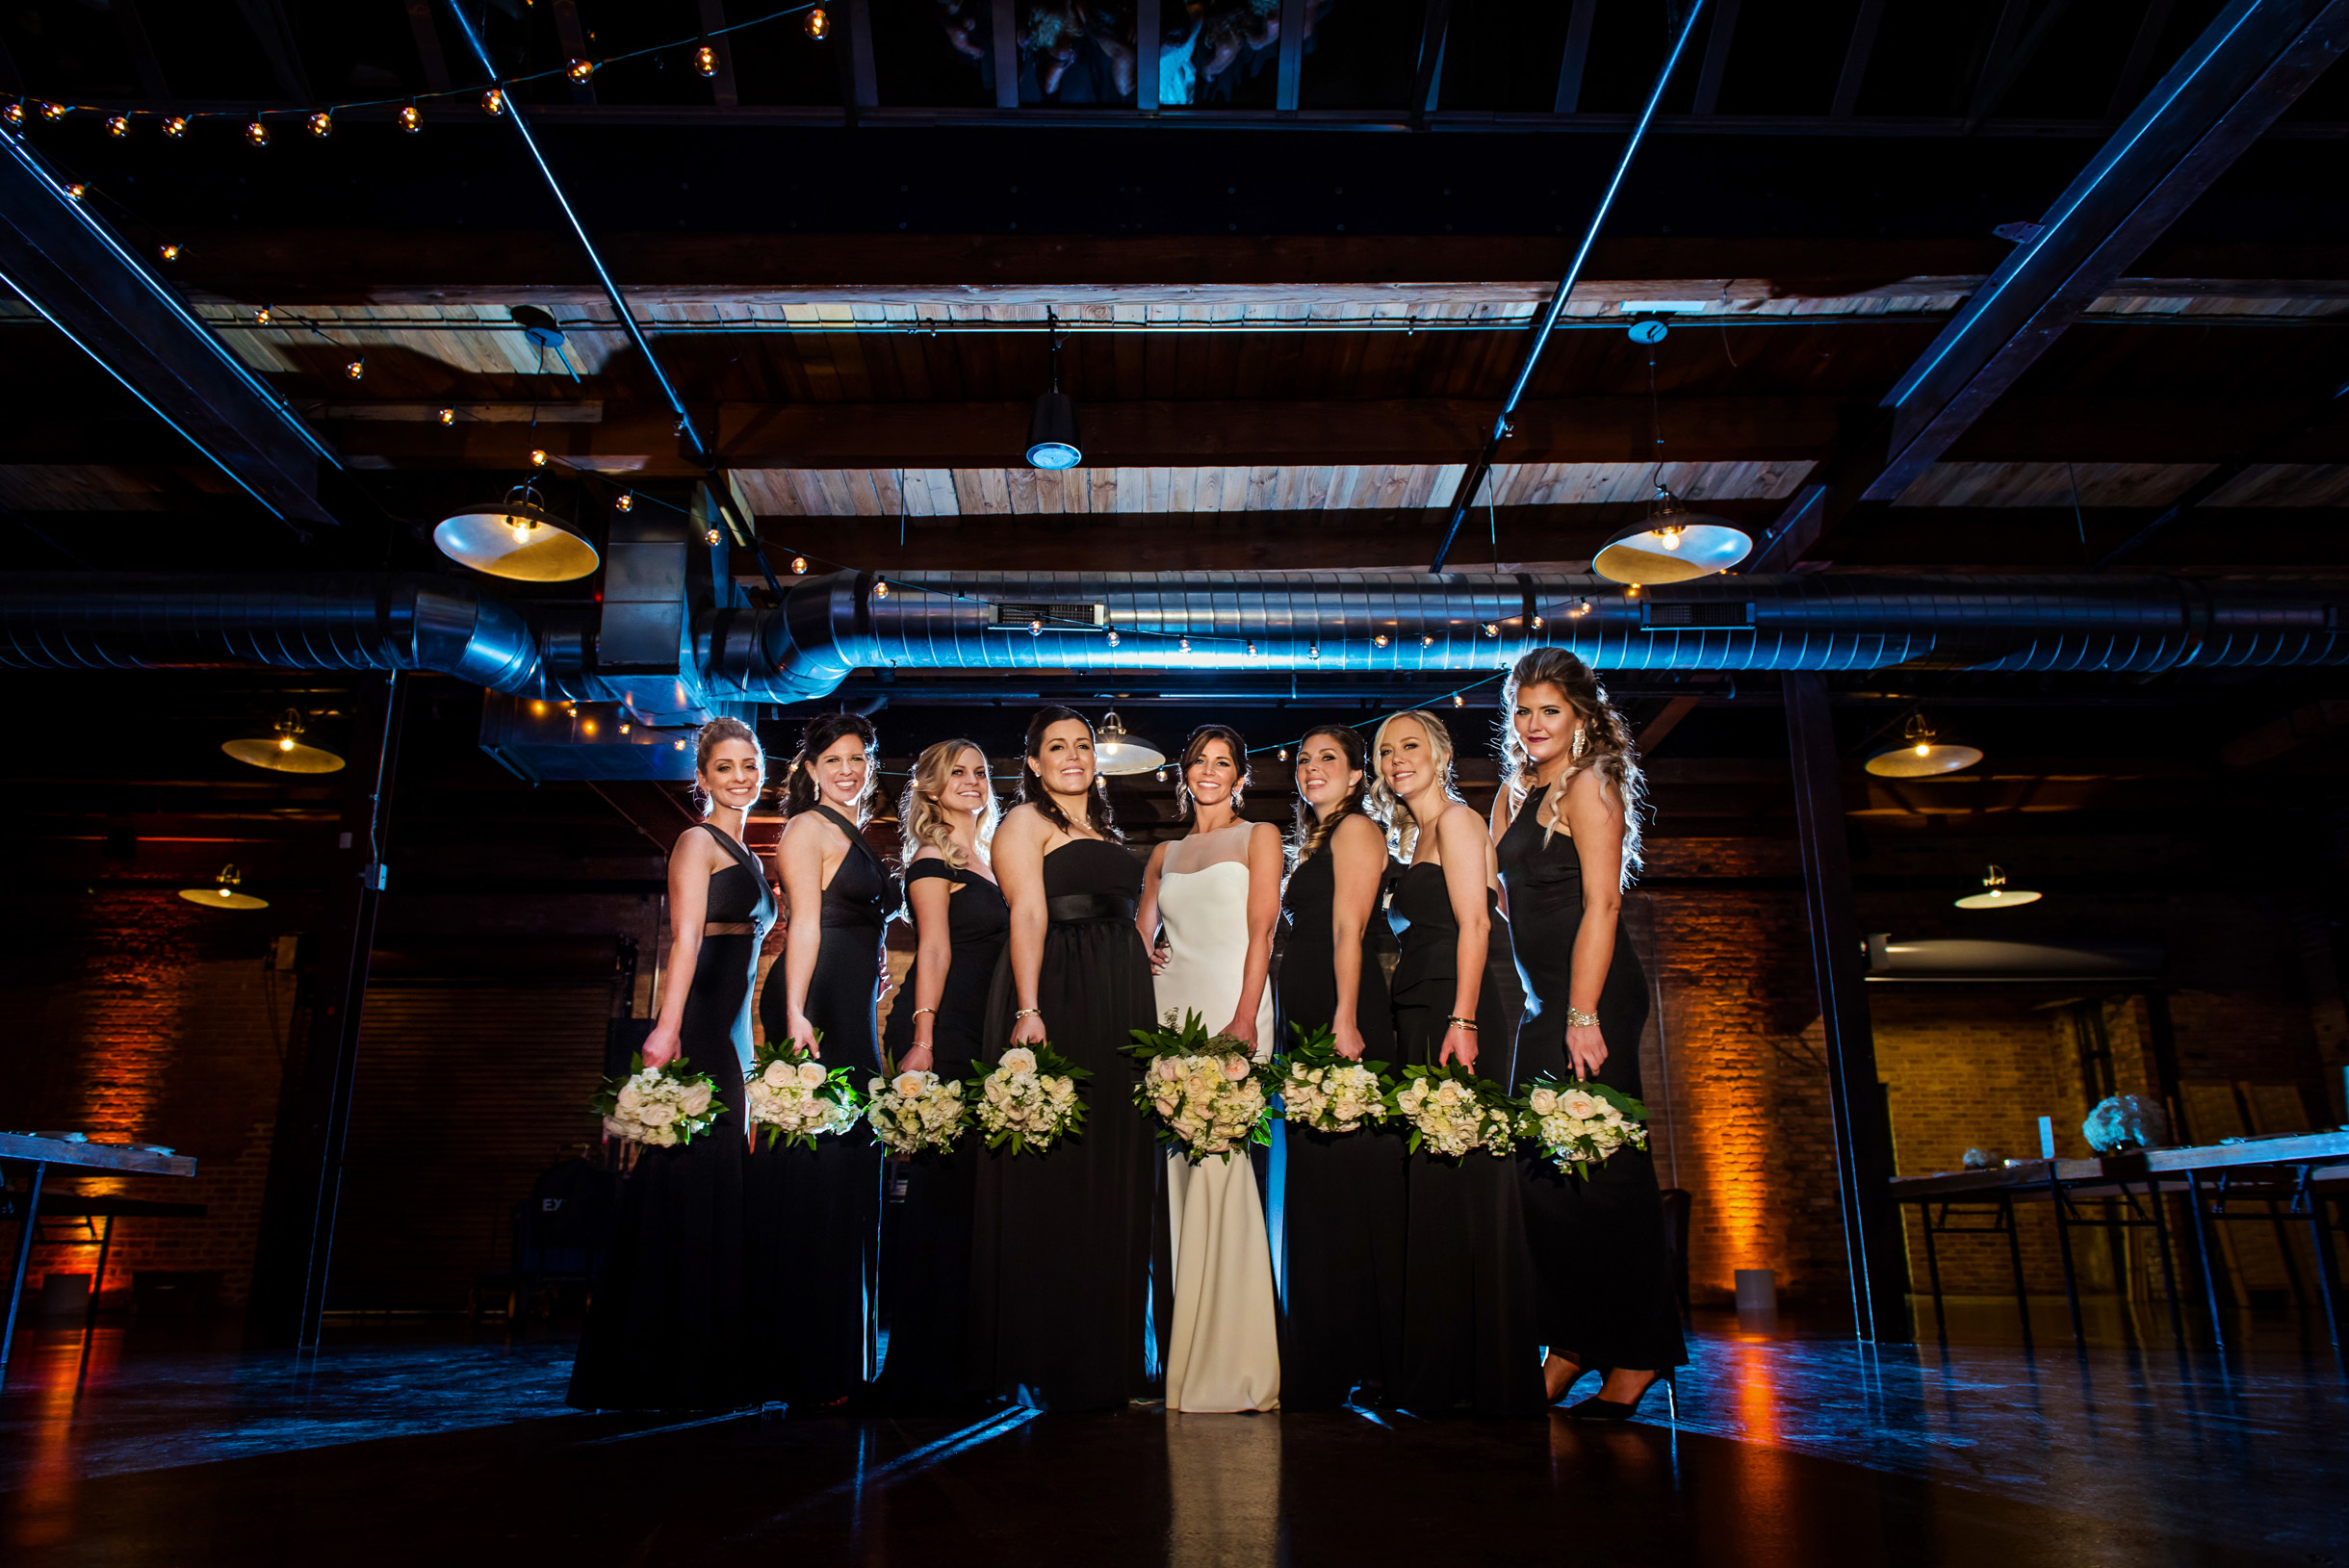 Bridesmaids in blue light holding wedding bouquets